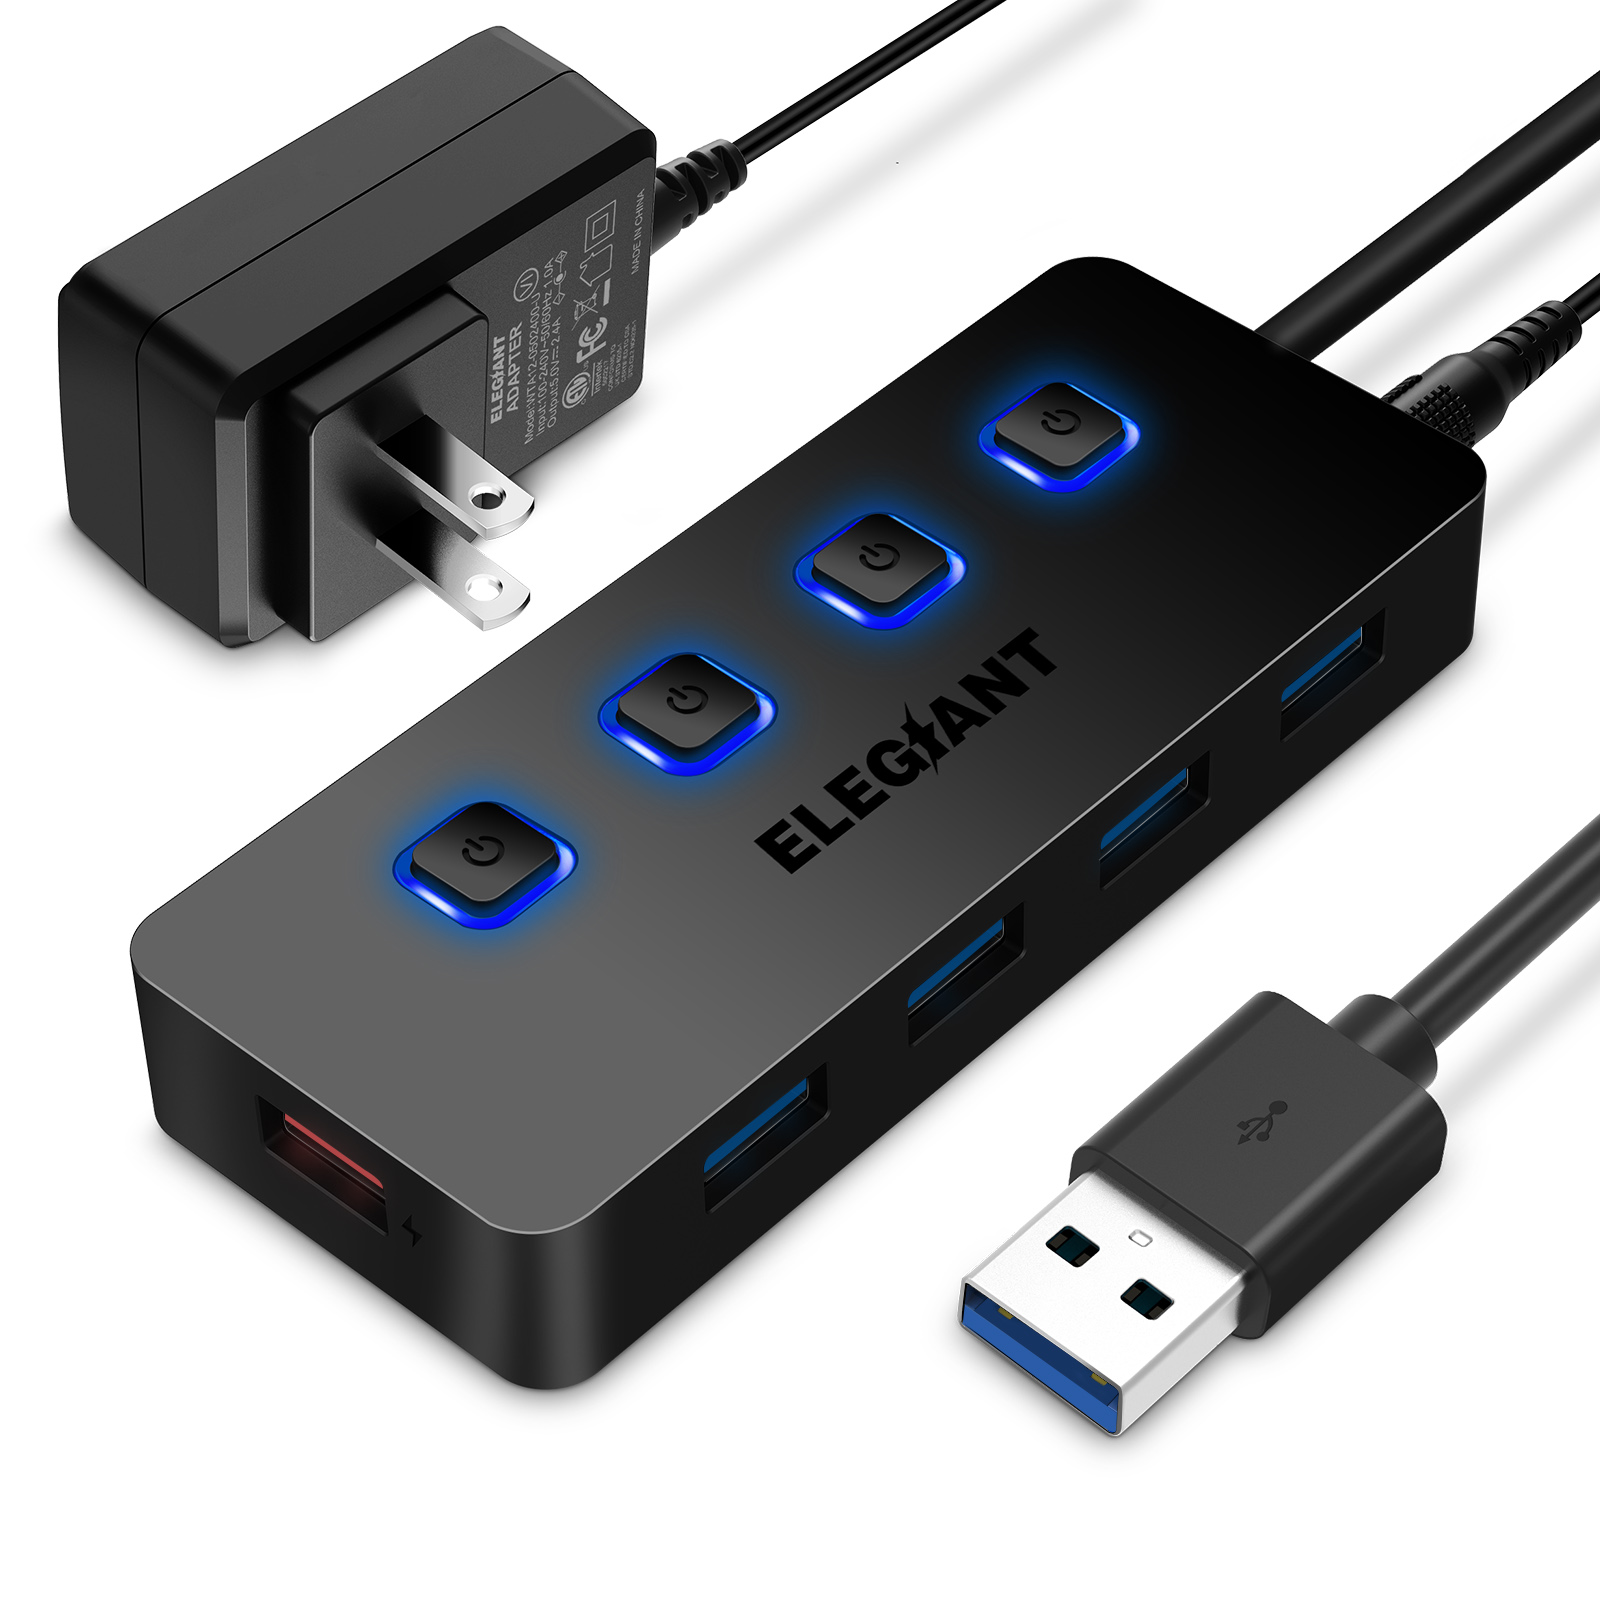 Find ELEGIANT 4 Port USB Hub 1 USB Smart Charging Port USB 3 0 Hub Powered USB Hub with Individual On/Off Switches USB Splitter with Power Adapter Supports Desktop Laptop Tablet MacBook iPad for Sale on Gipsybee.com with cryptocurrencies